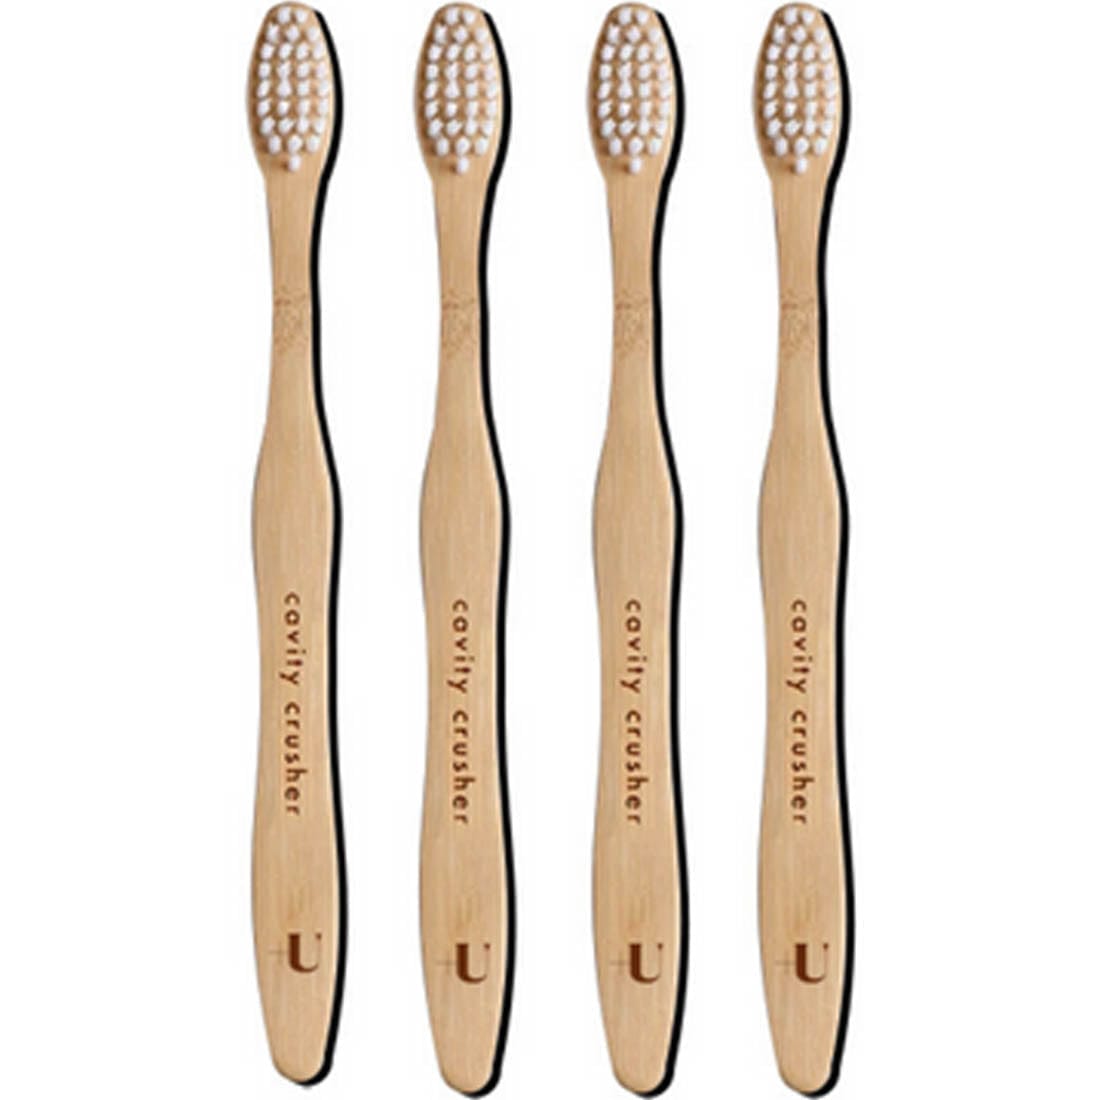 Plus Ultra Bamboo Toothbrushes For Kids